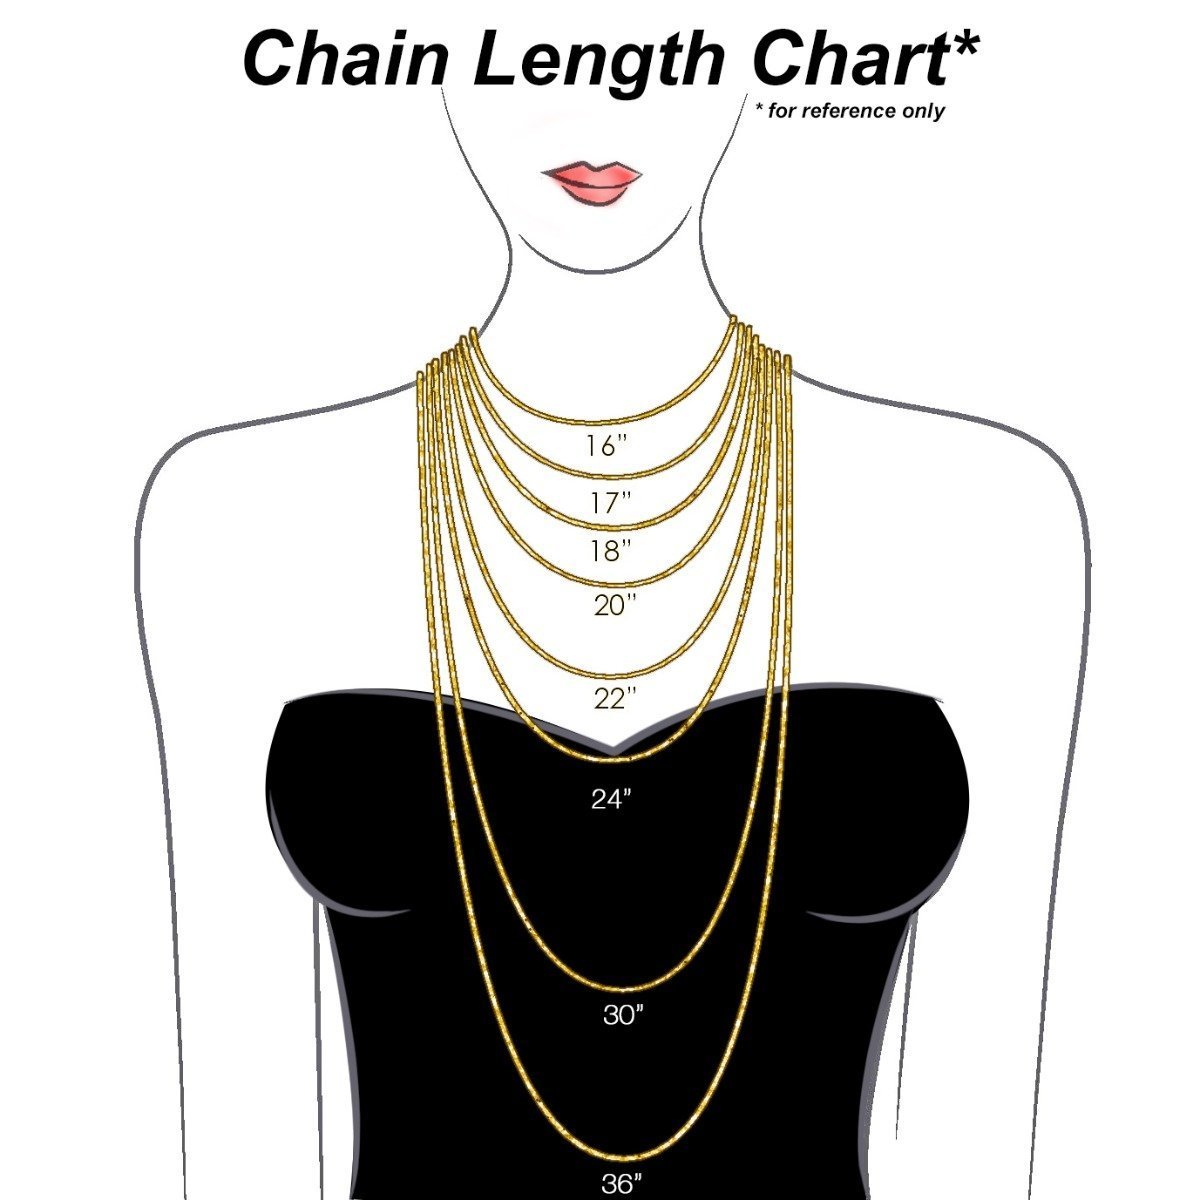 14KT YELLOW SOLID GOLD 4.5MM CONCAVE OPEN FIGARO CHAIN NECKLACE - 5 LENGTHS 18 Inch,20 Inch,22 Inch,24 Inch,30 Inch